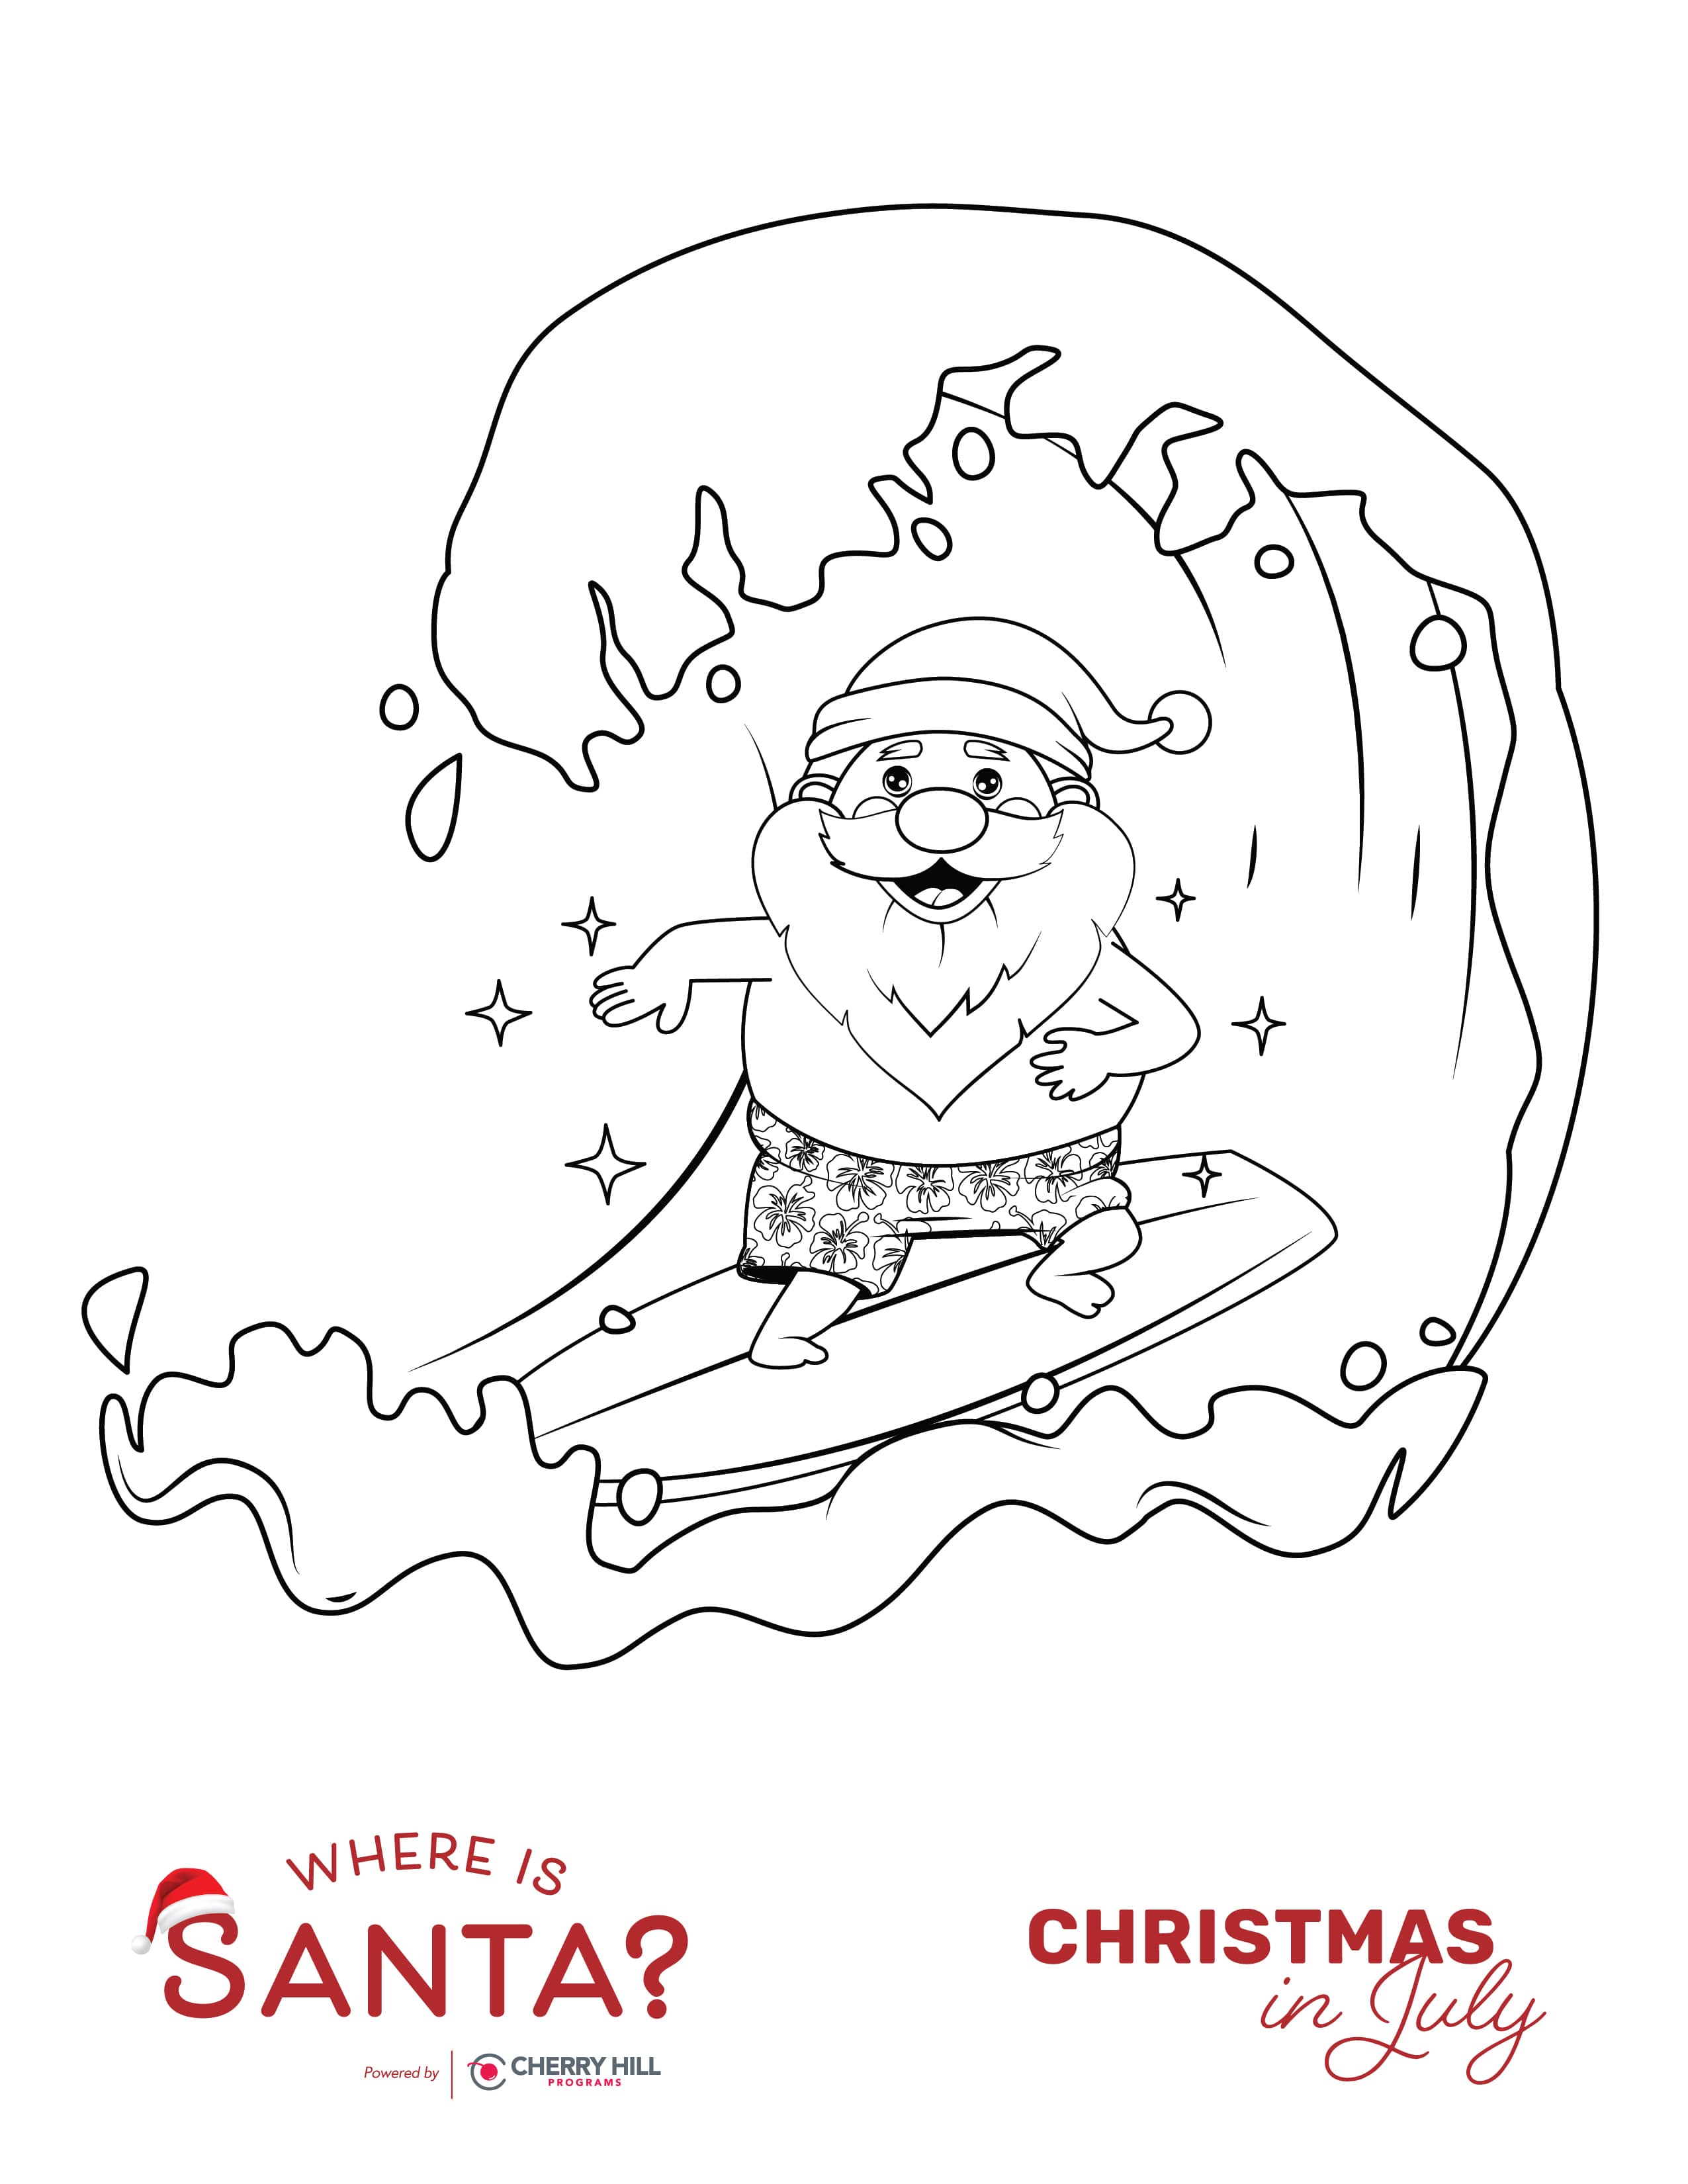 Christmas in July_Coloring Sheets-05